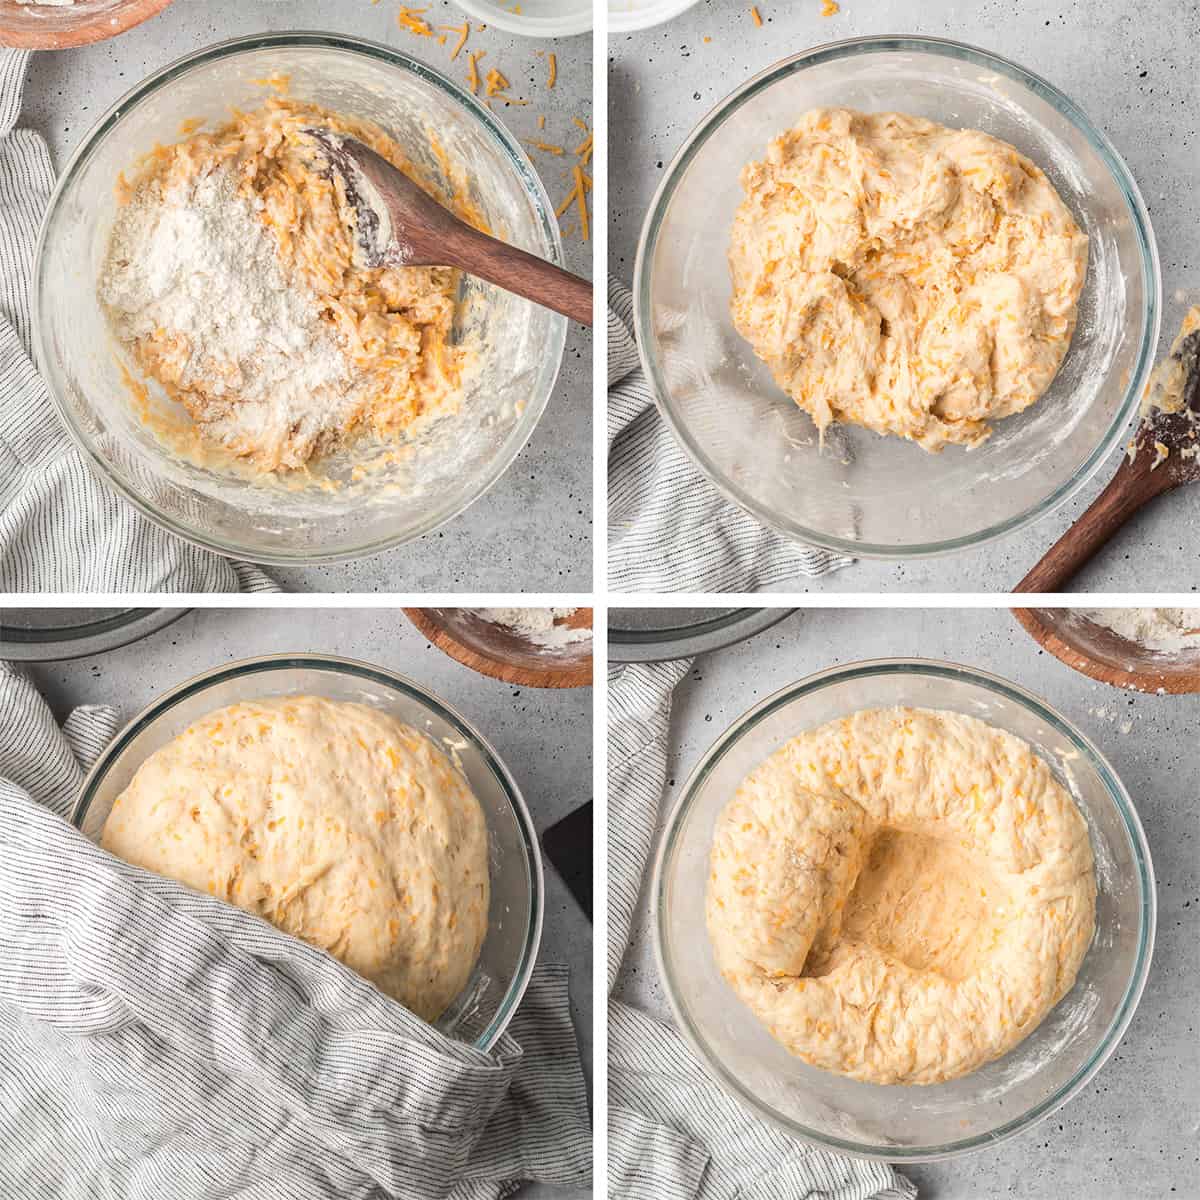 Four images of cheddar dinner roll dough before and after rising in a glass bowl.